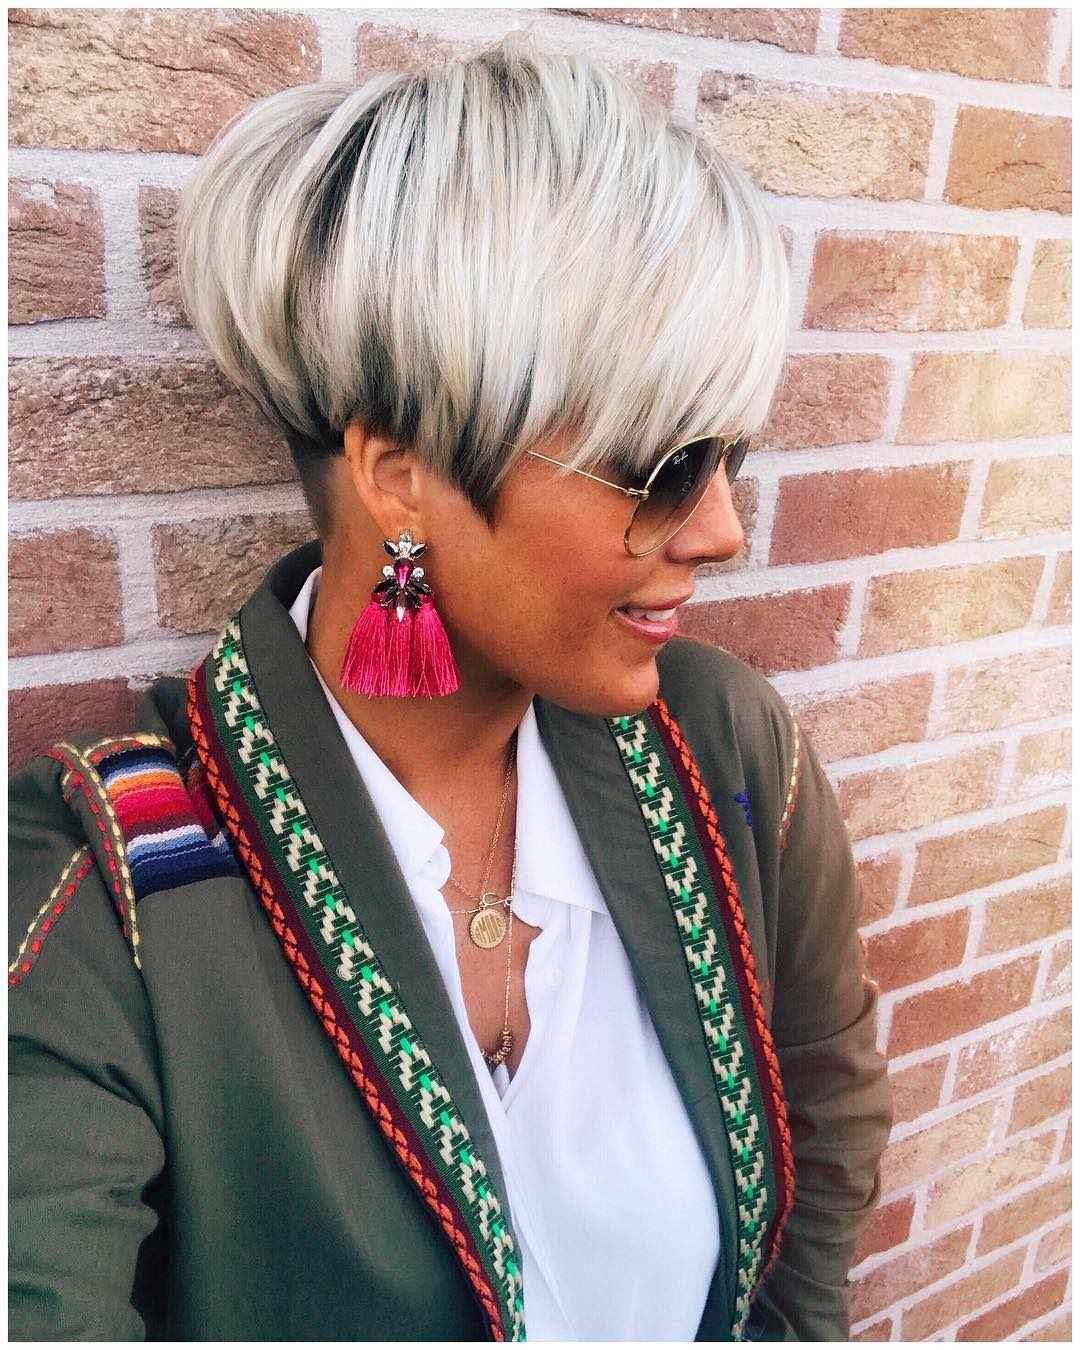 Short Haircuts For Fall 2020
 10 Colorful & Stylish Easy Pixie Haircut Ideas Short